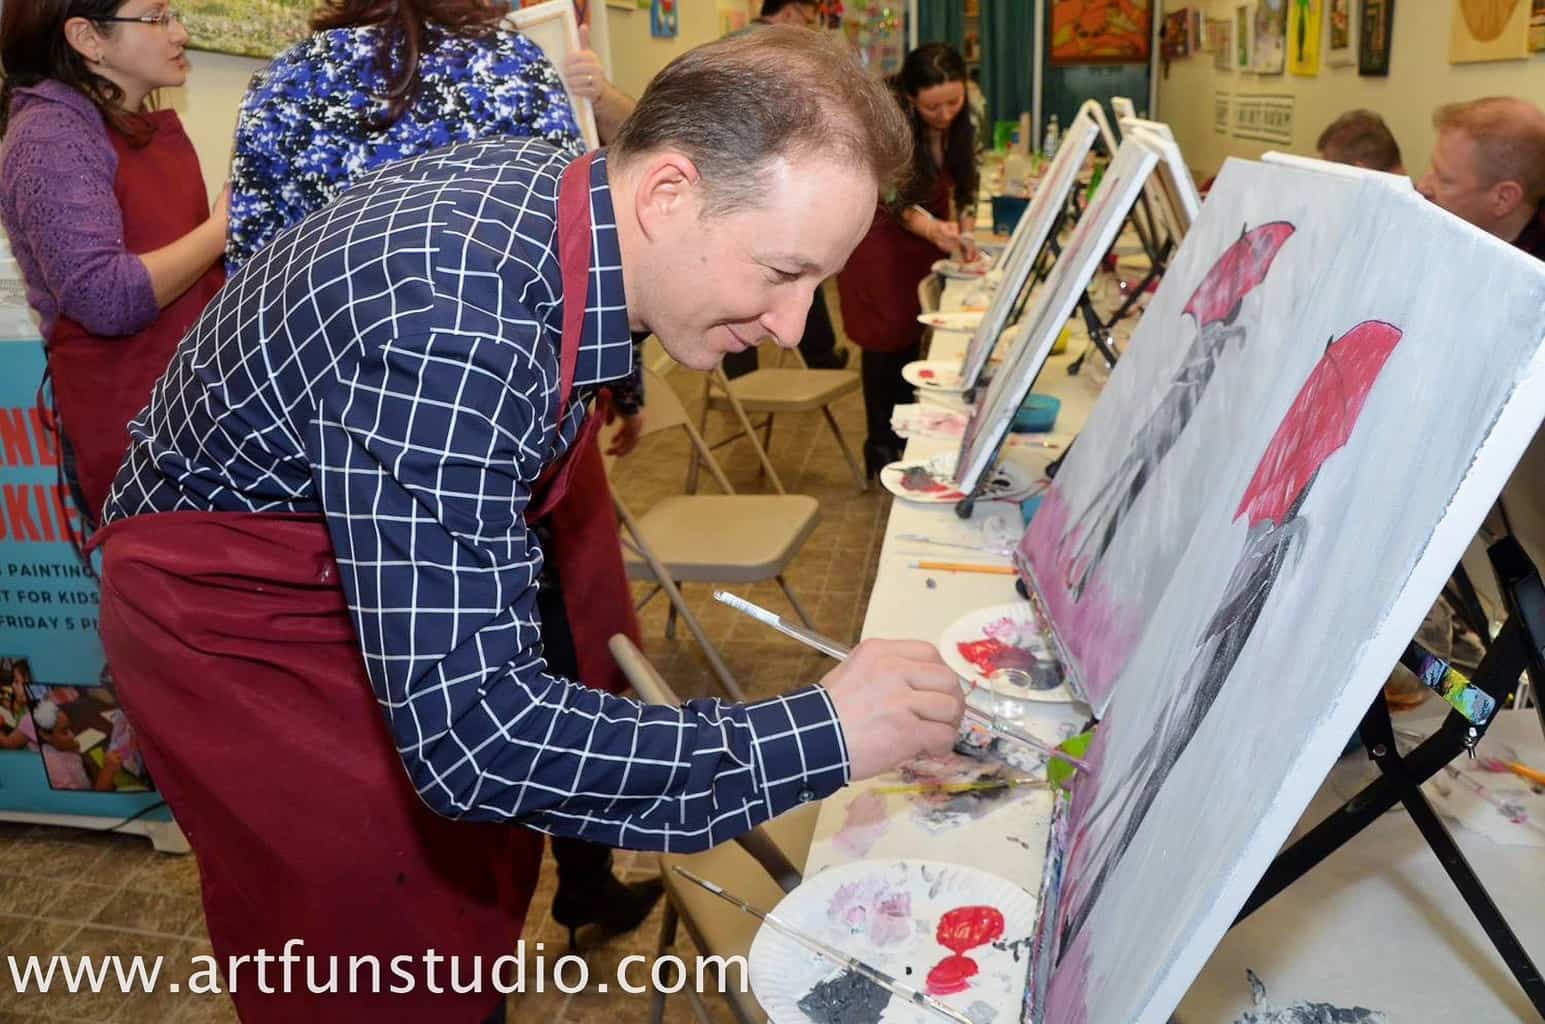 Man paints his art during his own Birthday Party